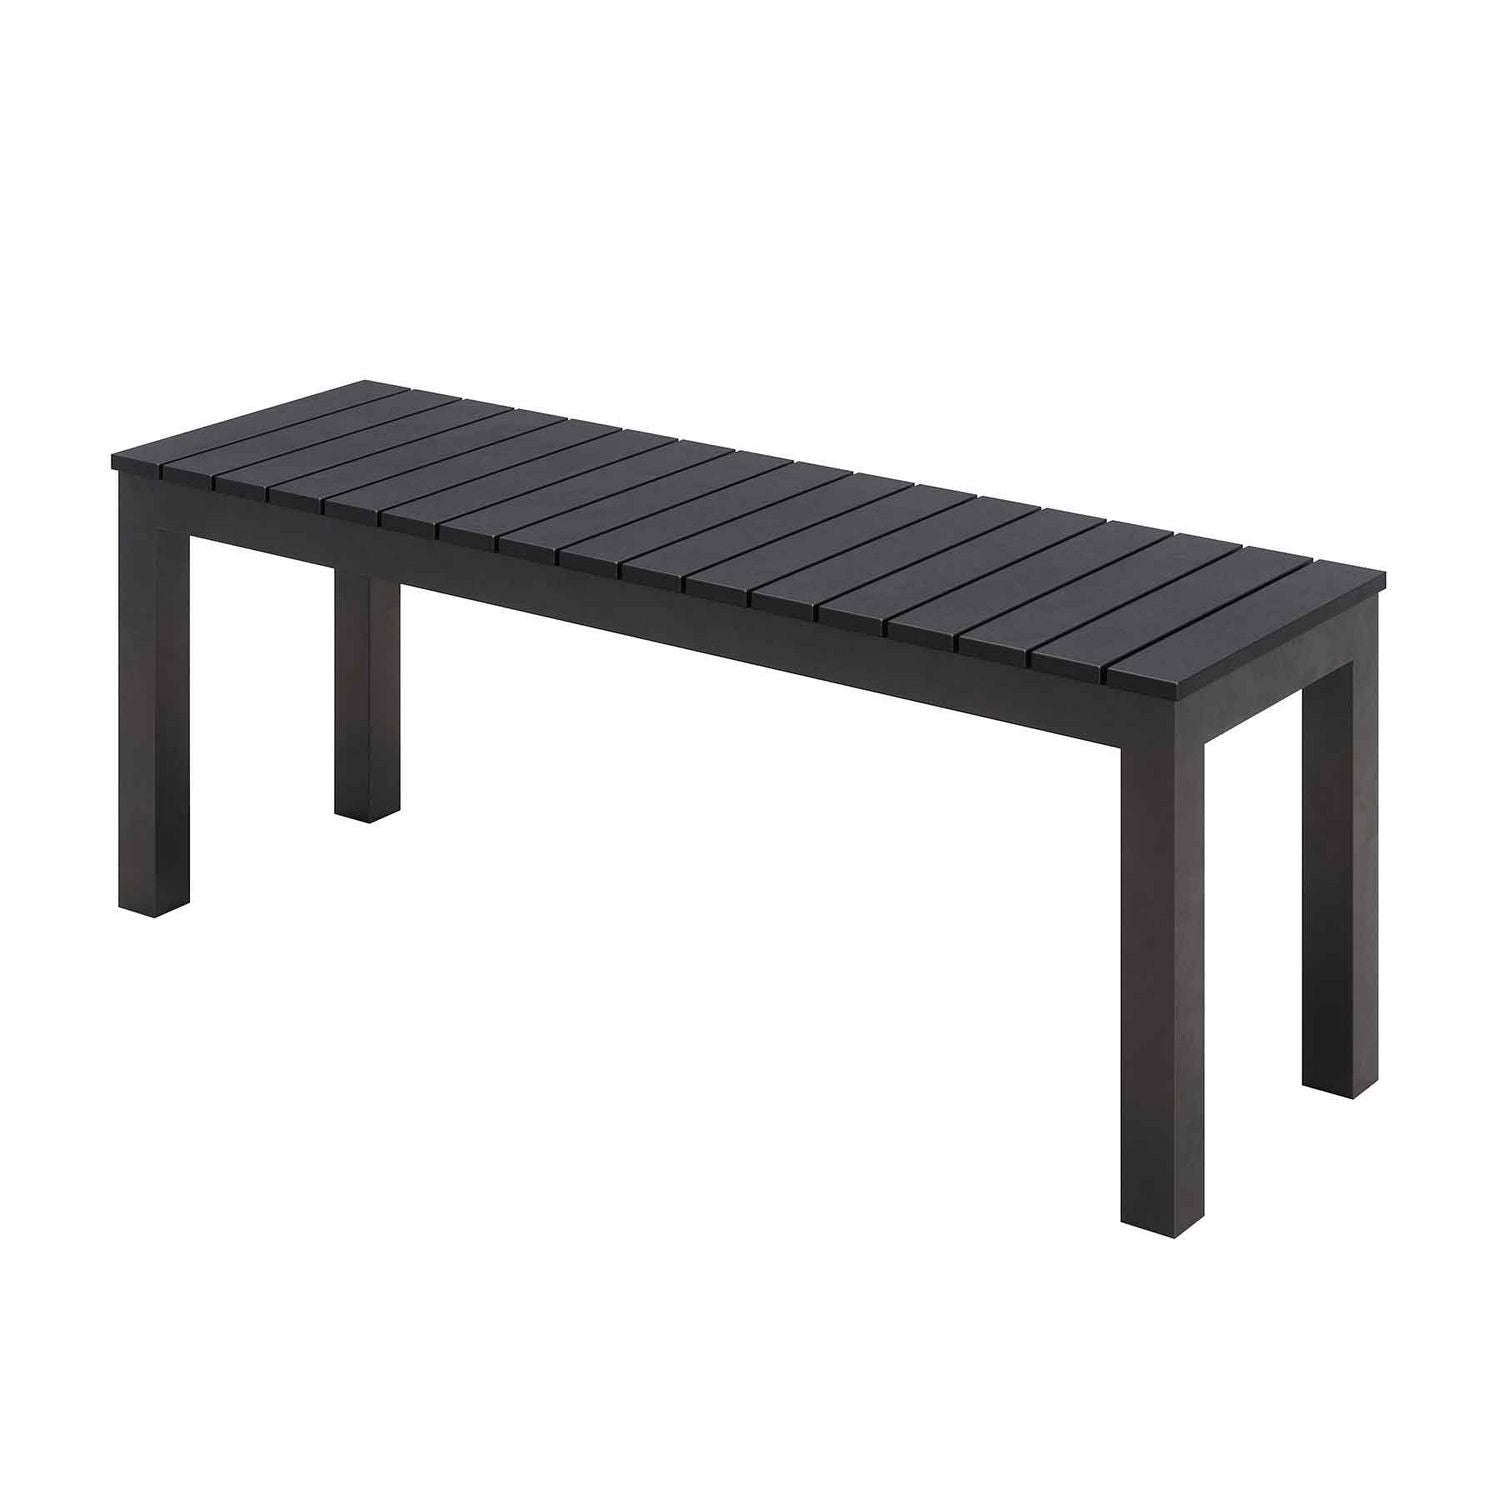 eveleen-outdoor-patio-table-w-two-black-powder-coated-polymer-chairs-and-two-benches-32-x-55-gray-ships-in-4-6-bus-days_kfi840031925152 - 2